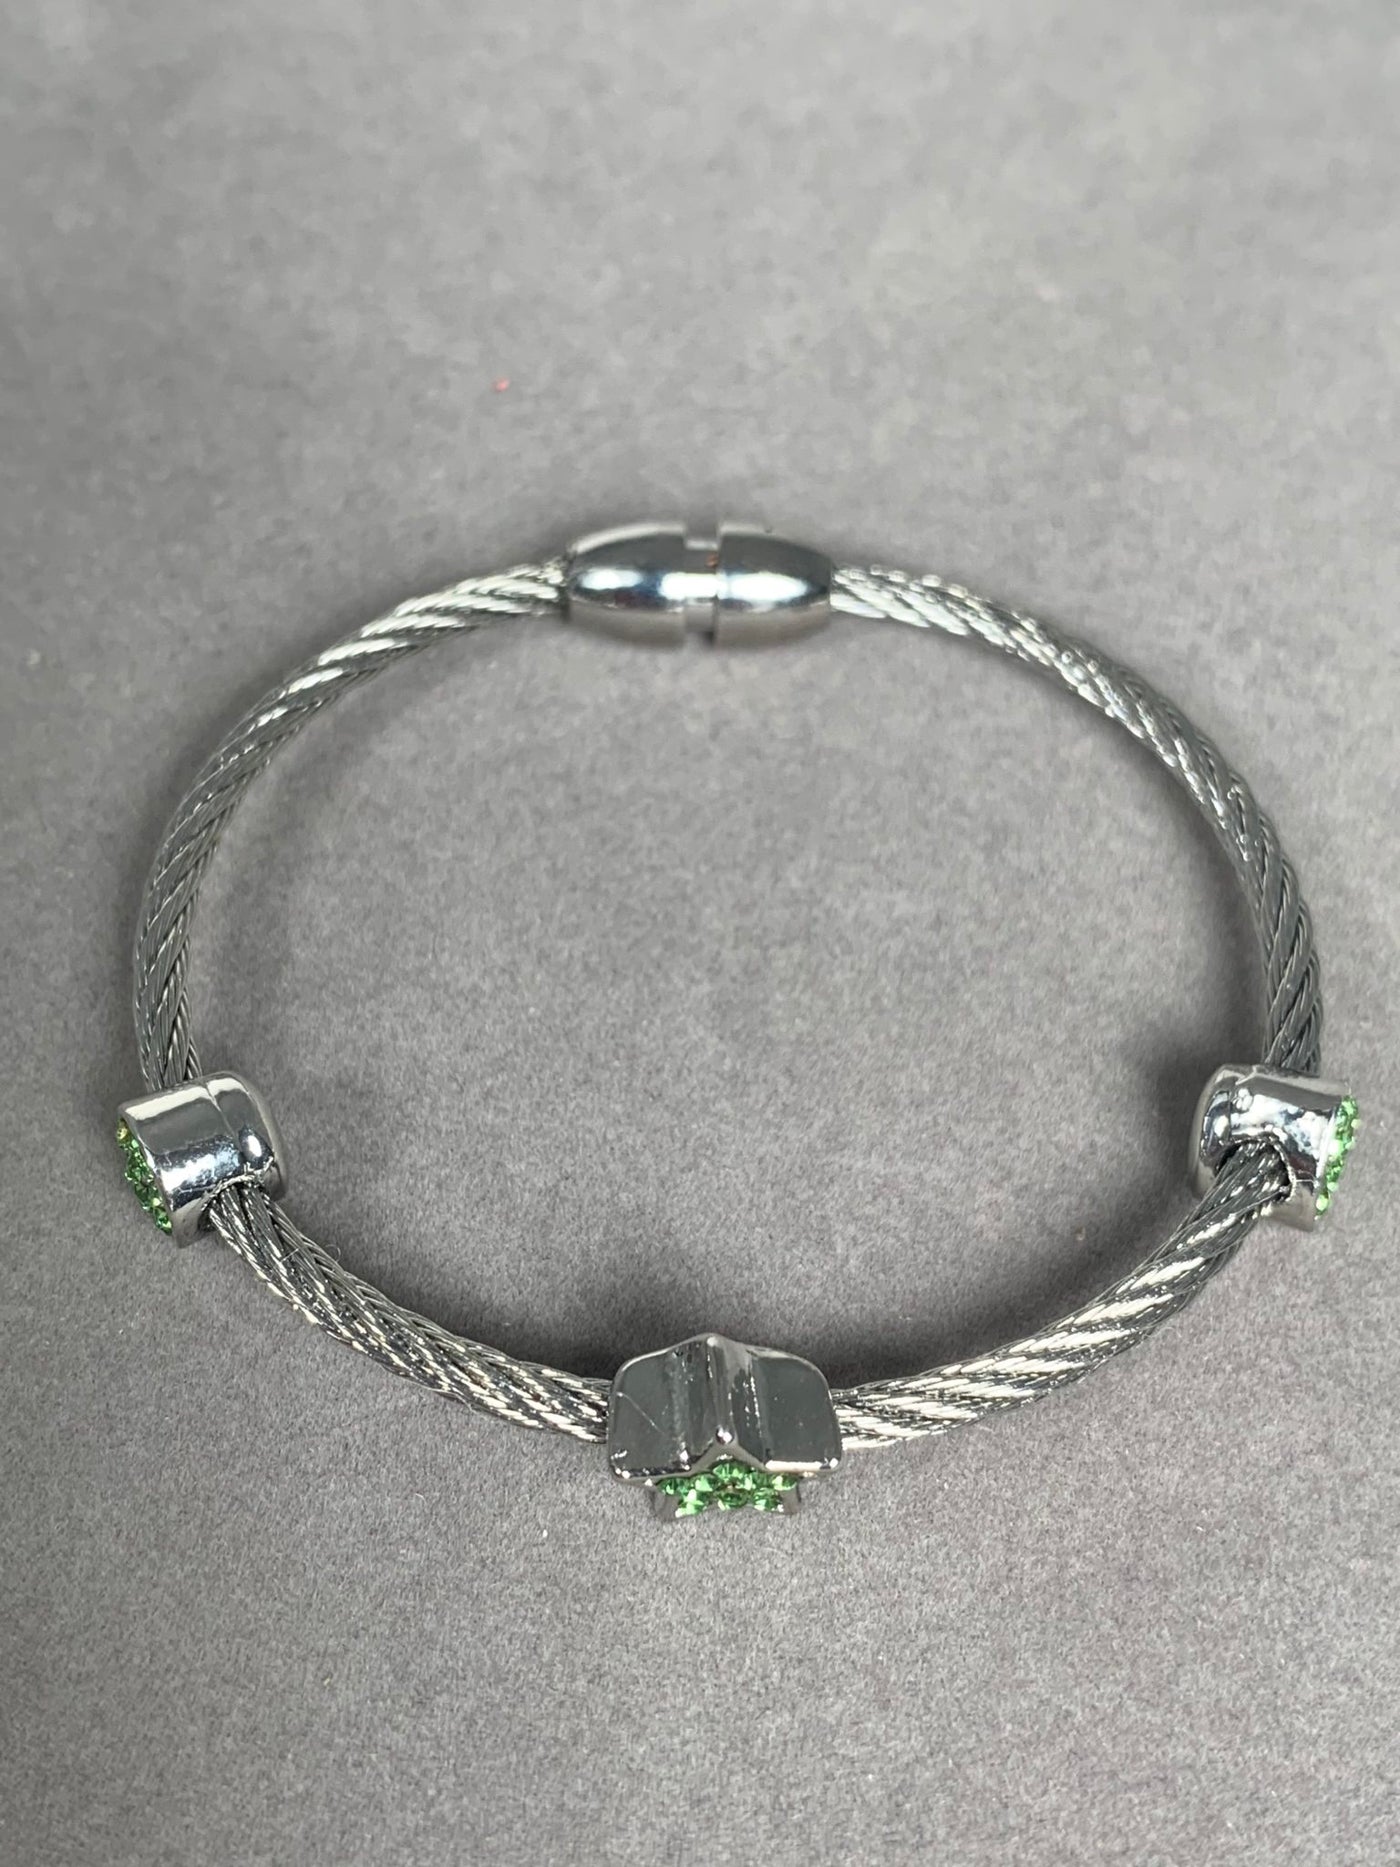 Silver Tone Wire Bangle Bracelet with 3 Green Pave Crystal Motifs